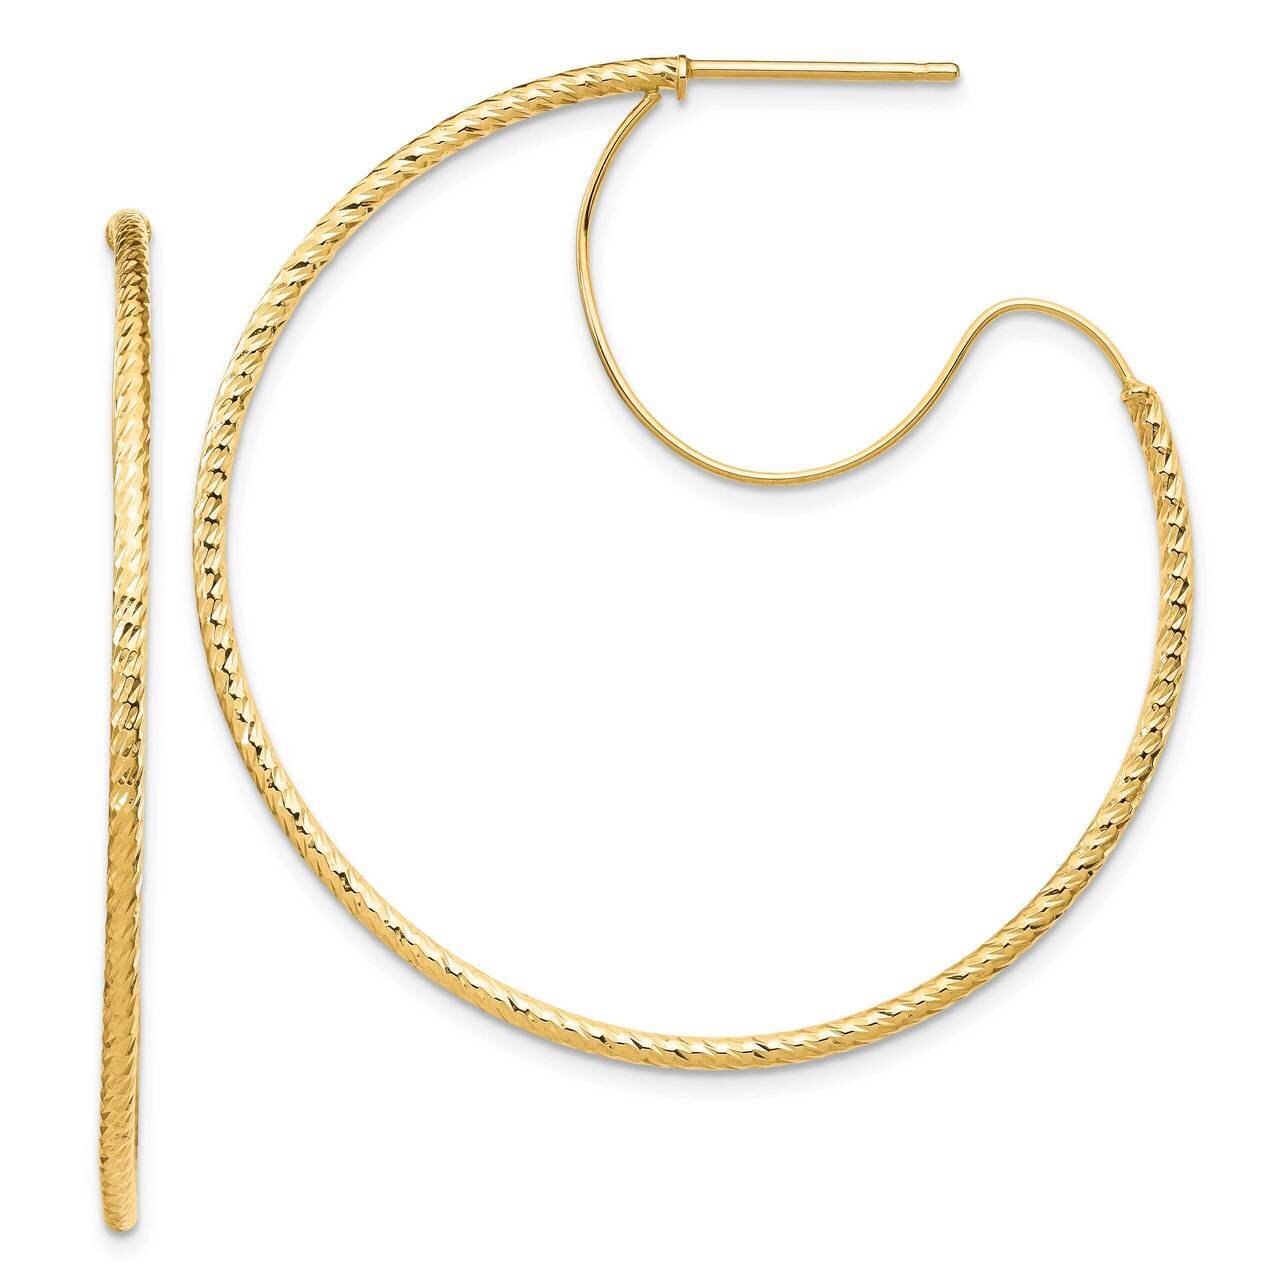 1.5x40mm Diamond-cut with Polished wire Hoop Earrings 14k Gold TF1690